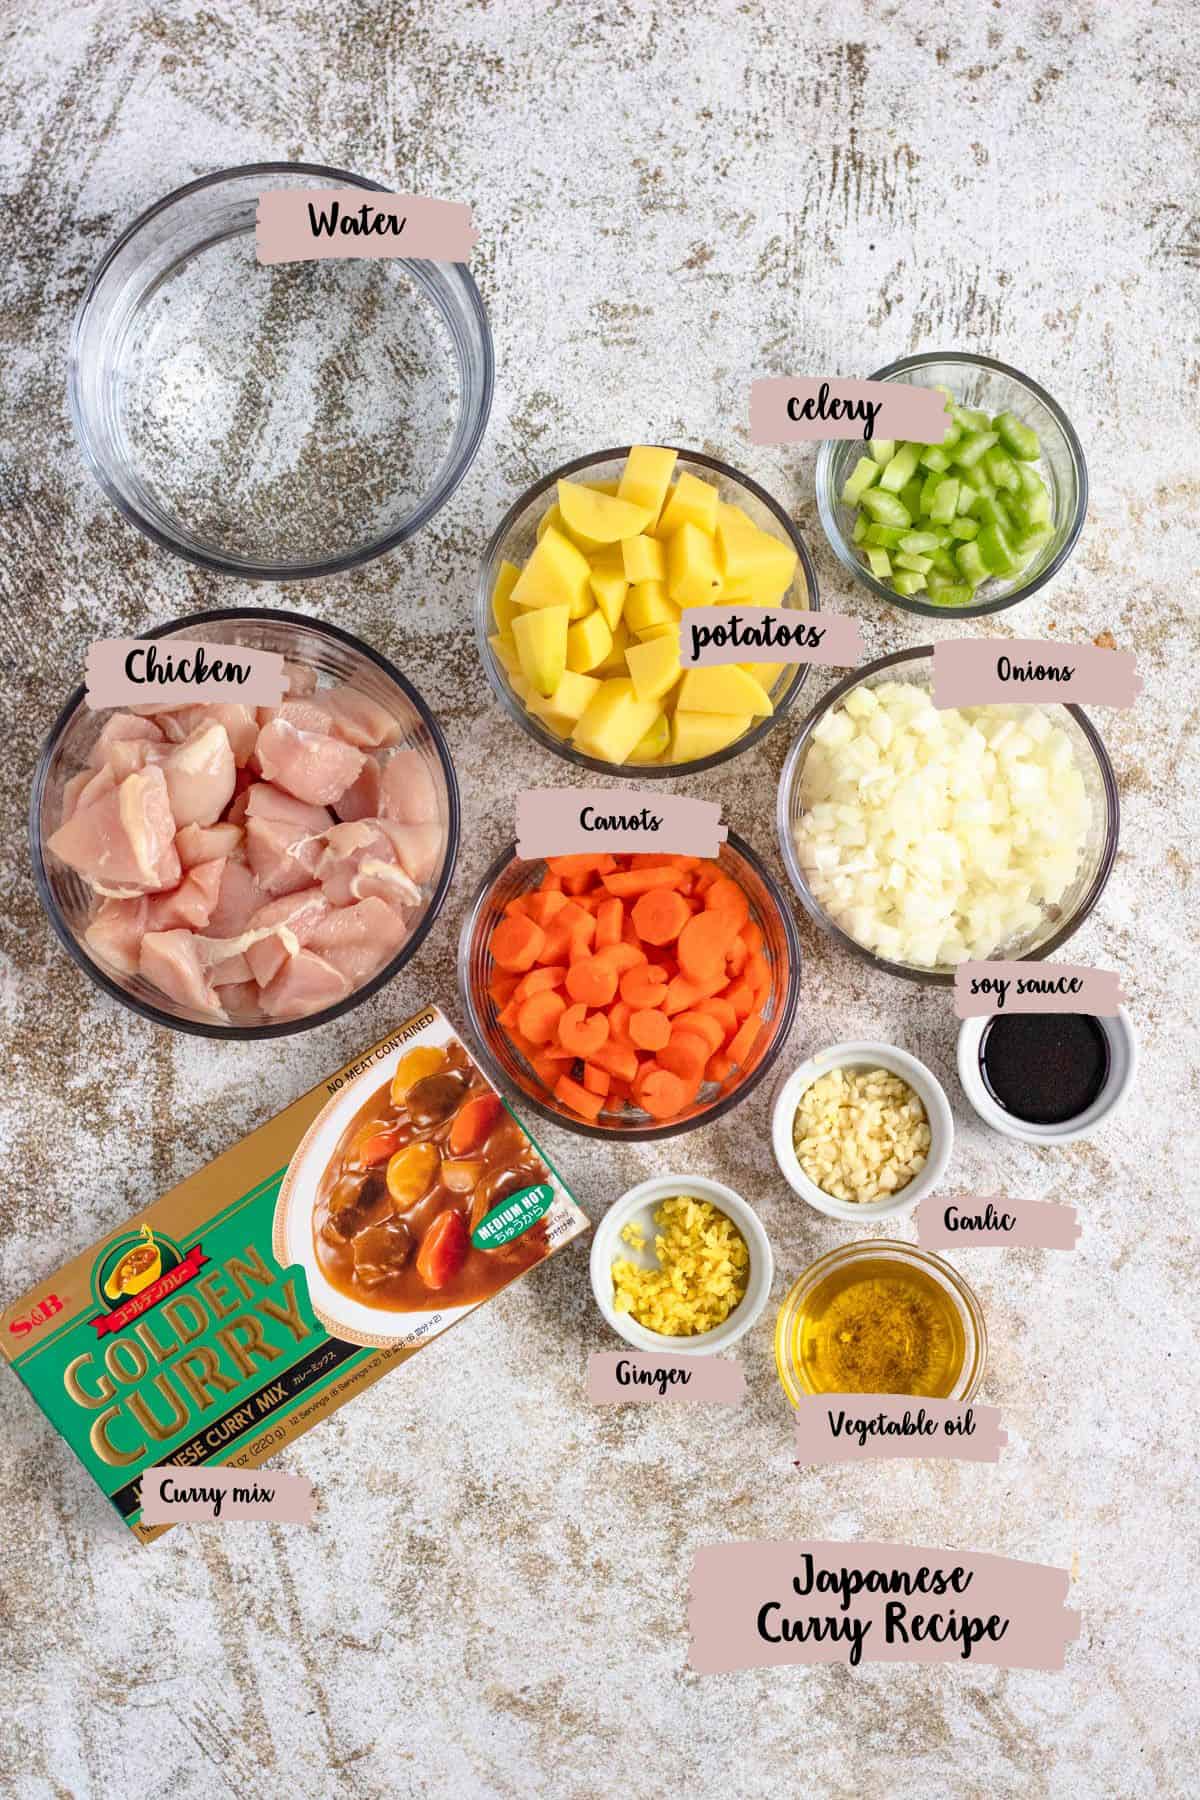 Ingredients shown are used to prepare Japanese curry recipe. 